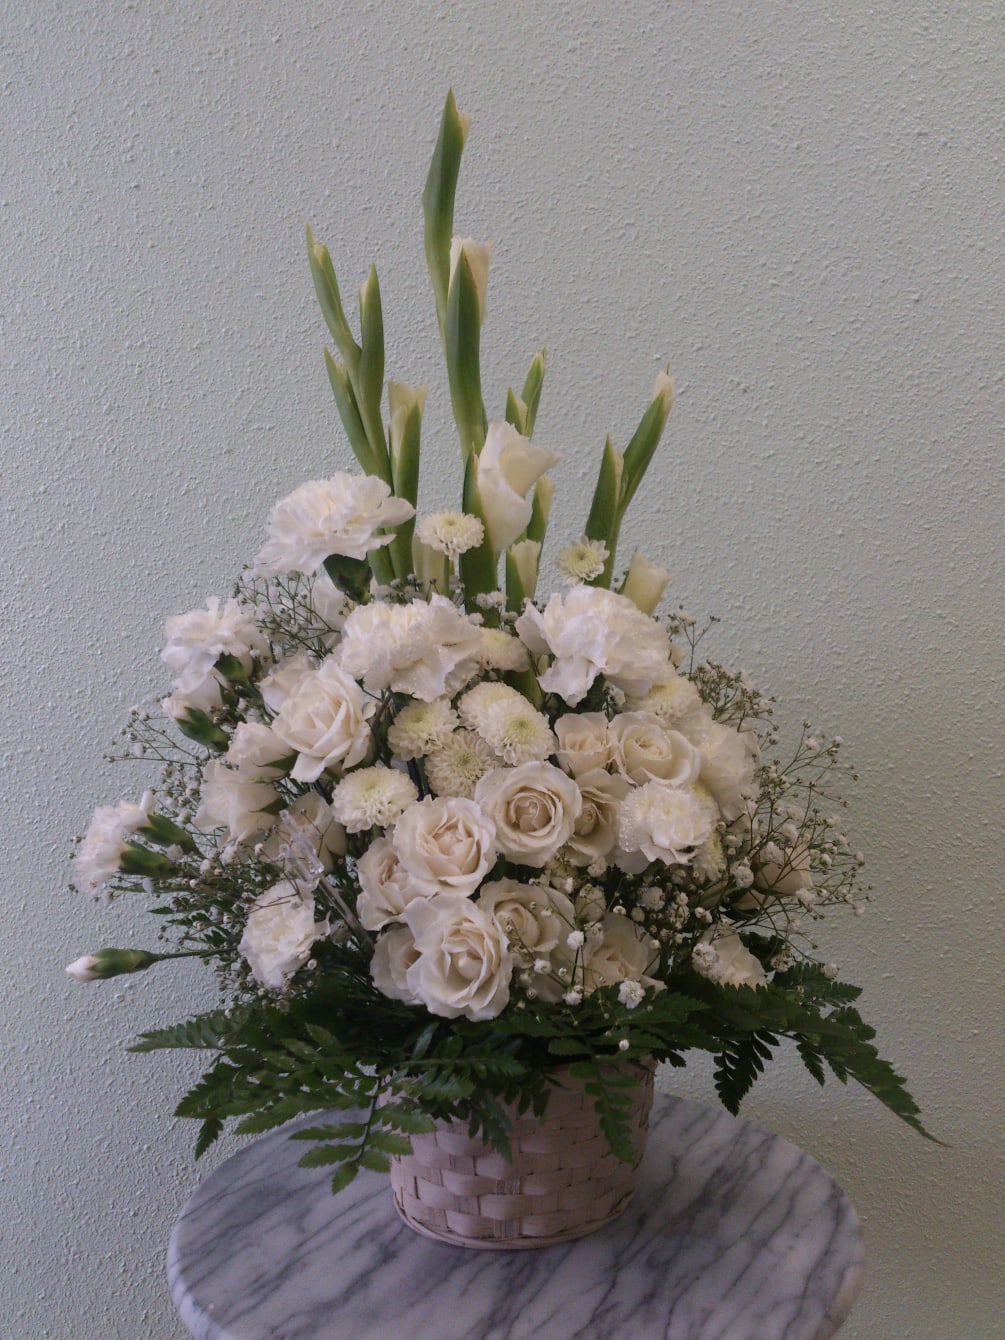 The Eternal Tribute Basket Arrangement is a spiritual and loving way to